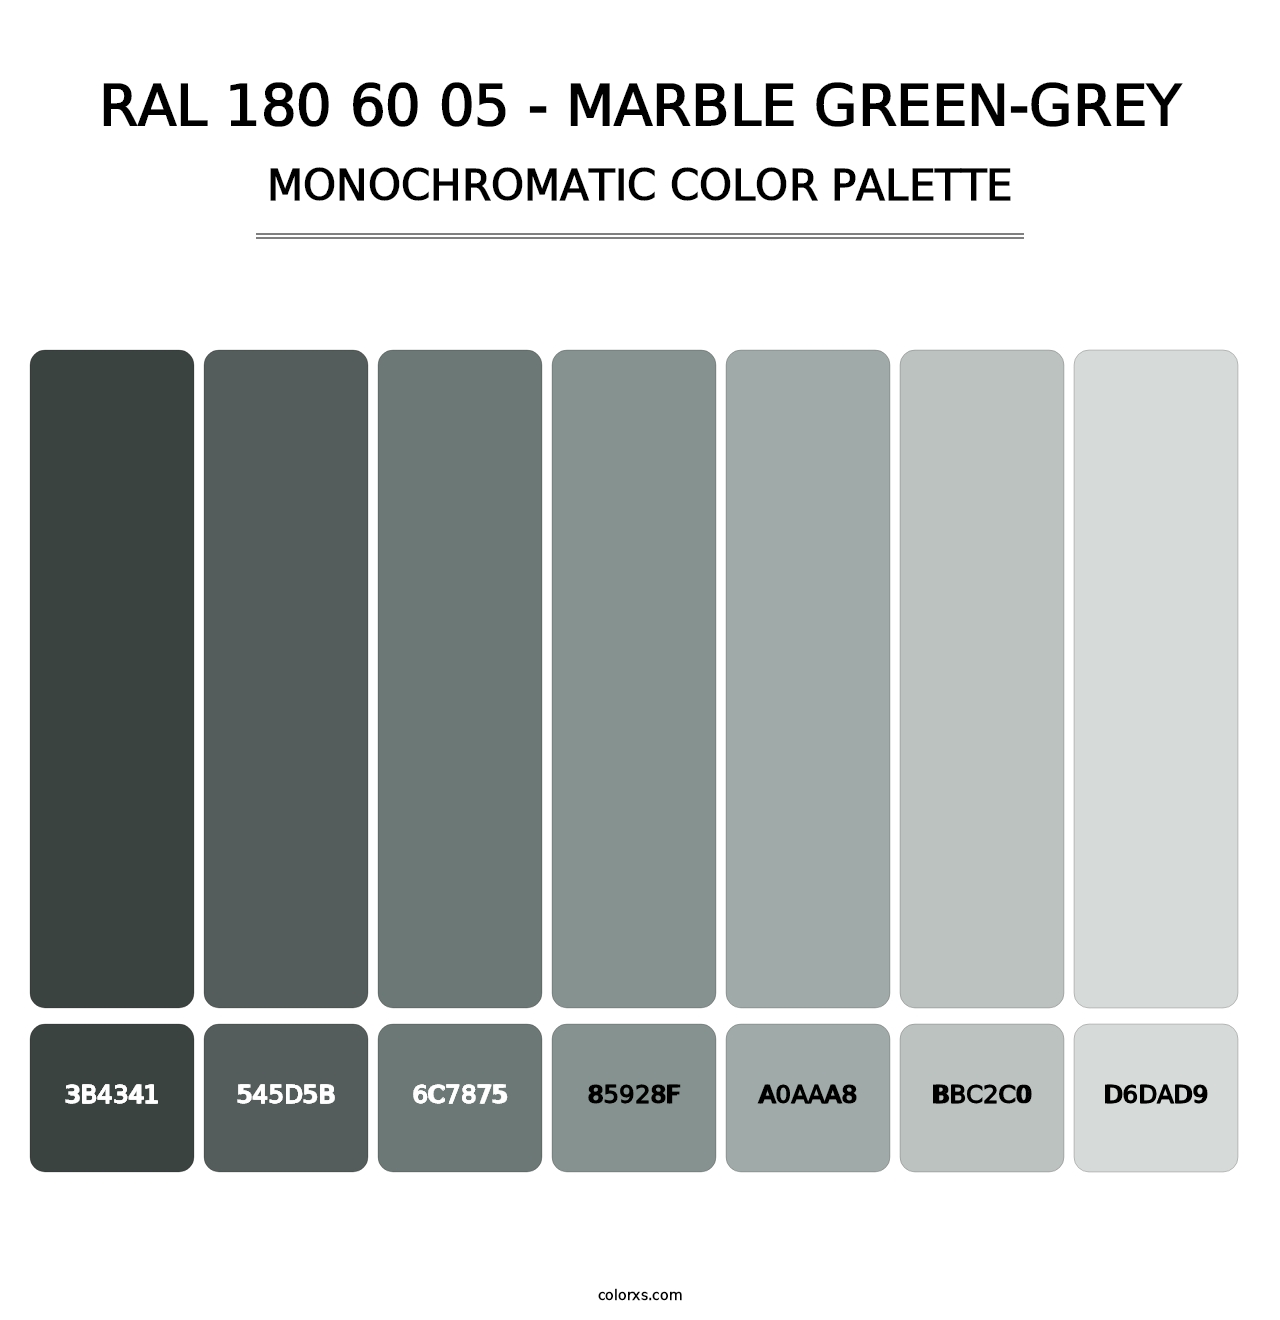 RAL 180 60 05 - Marble Green-Grey - Monochromatic Color Palette